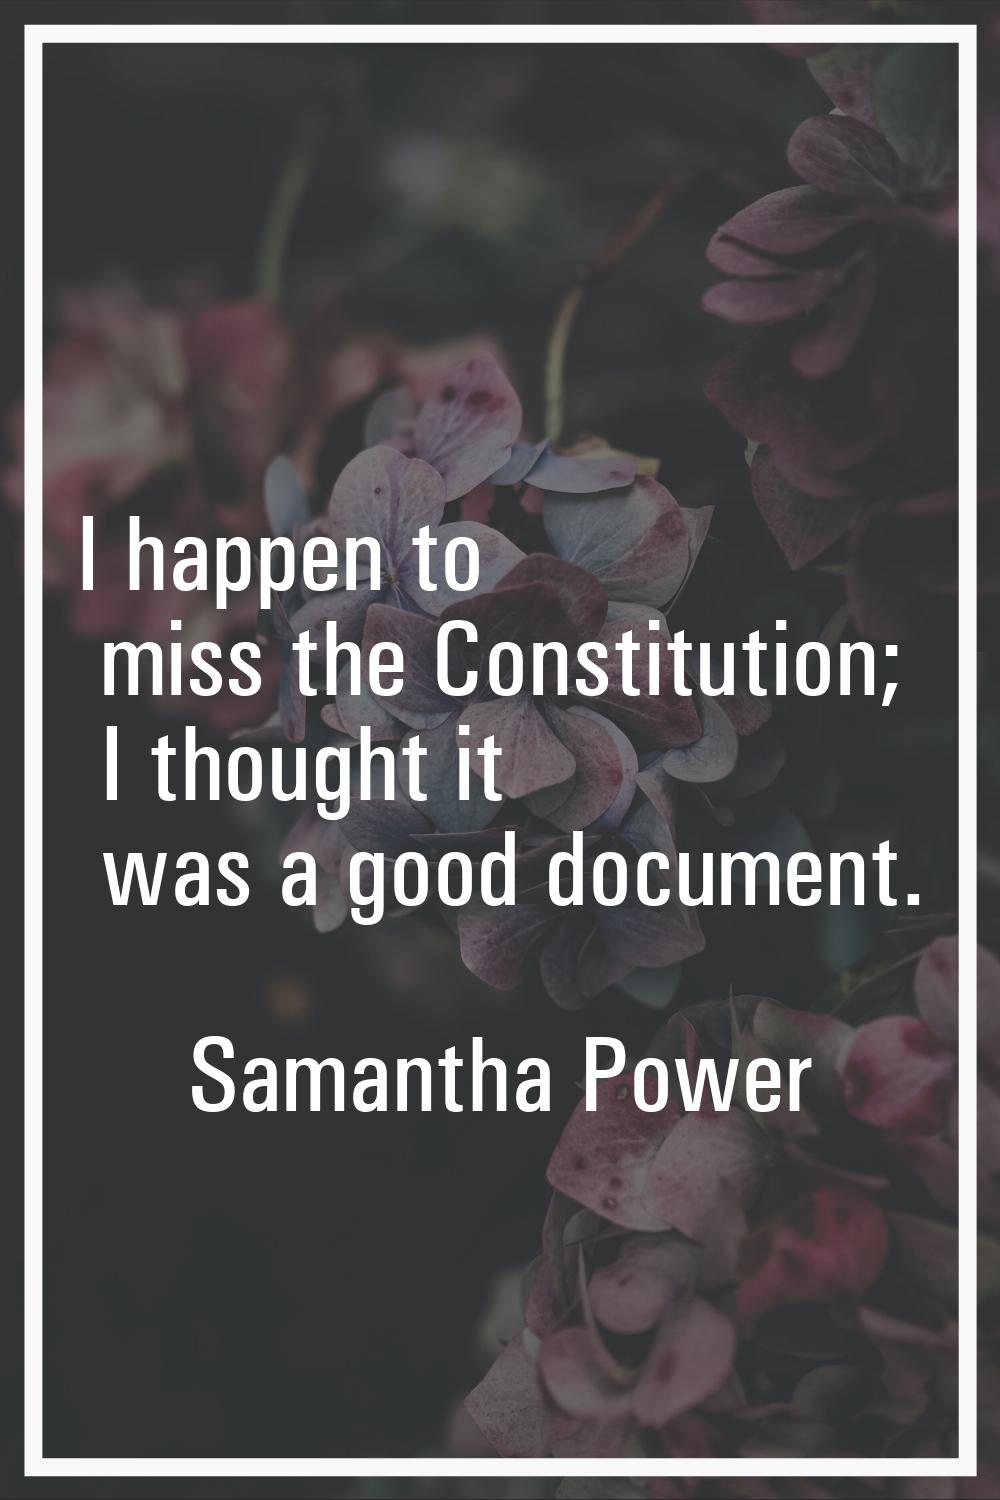 I happen to miss the Constitution; I thought it was a good document.